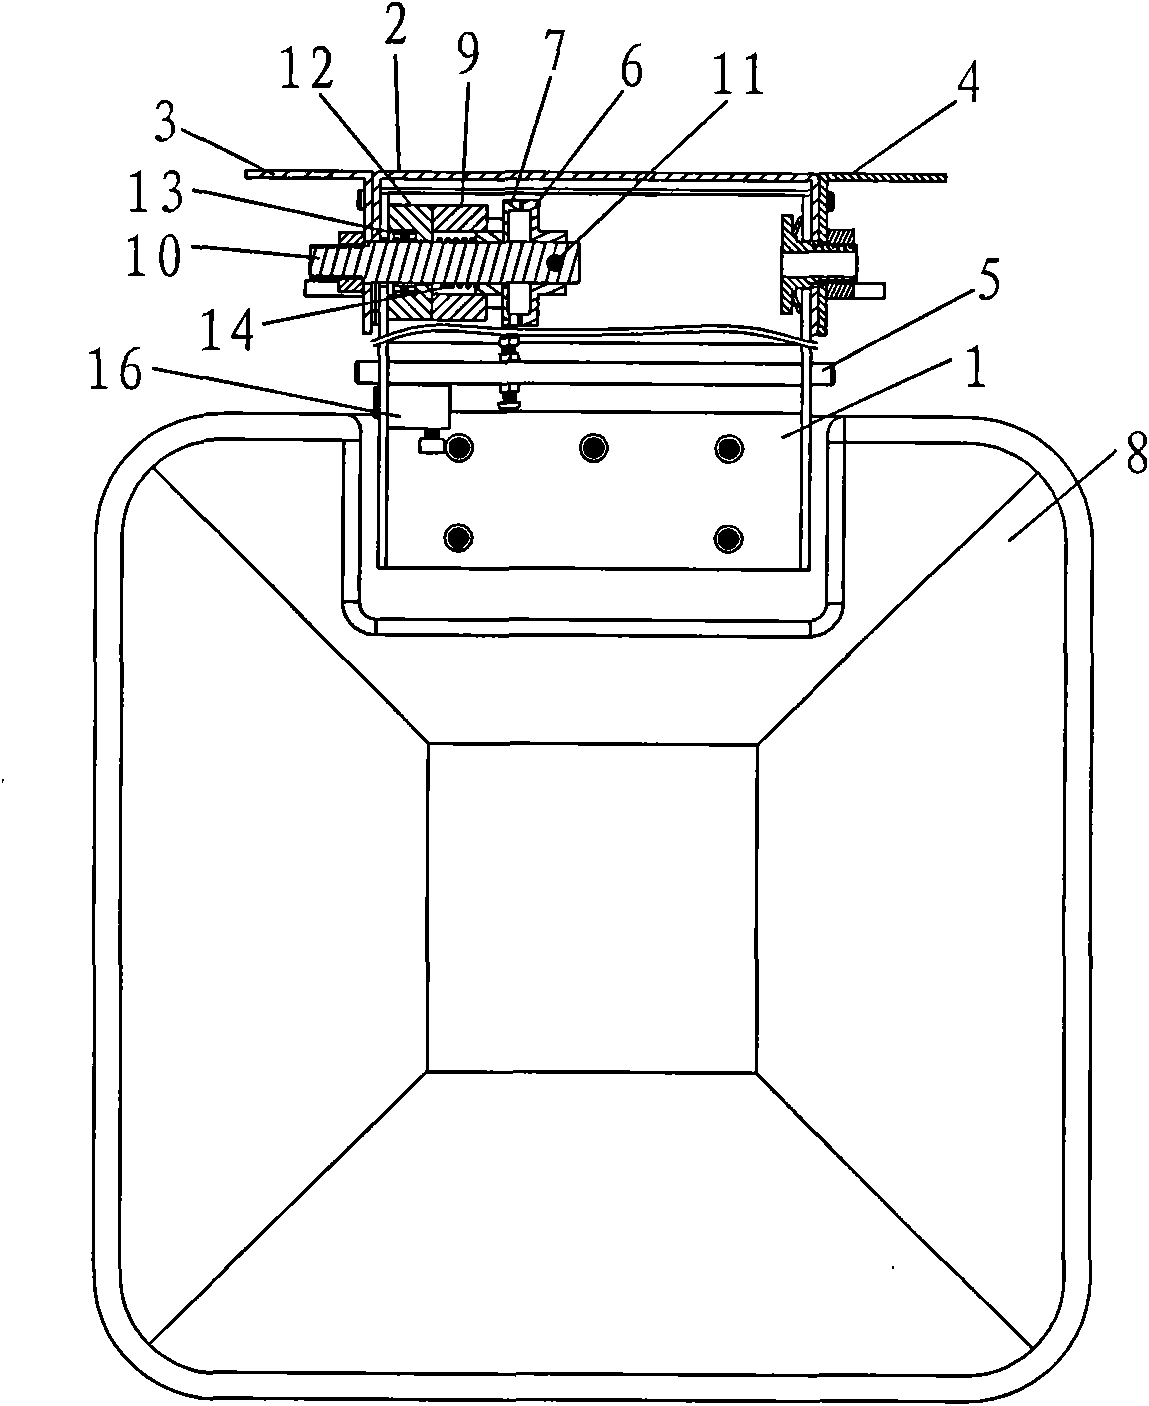 Rotating self-locking mechanism used for on-board liquid crystal television screen